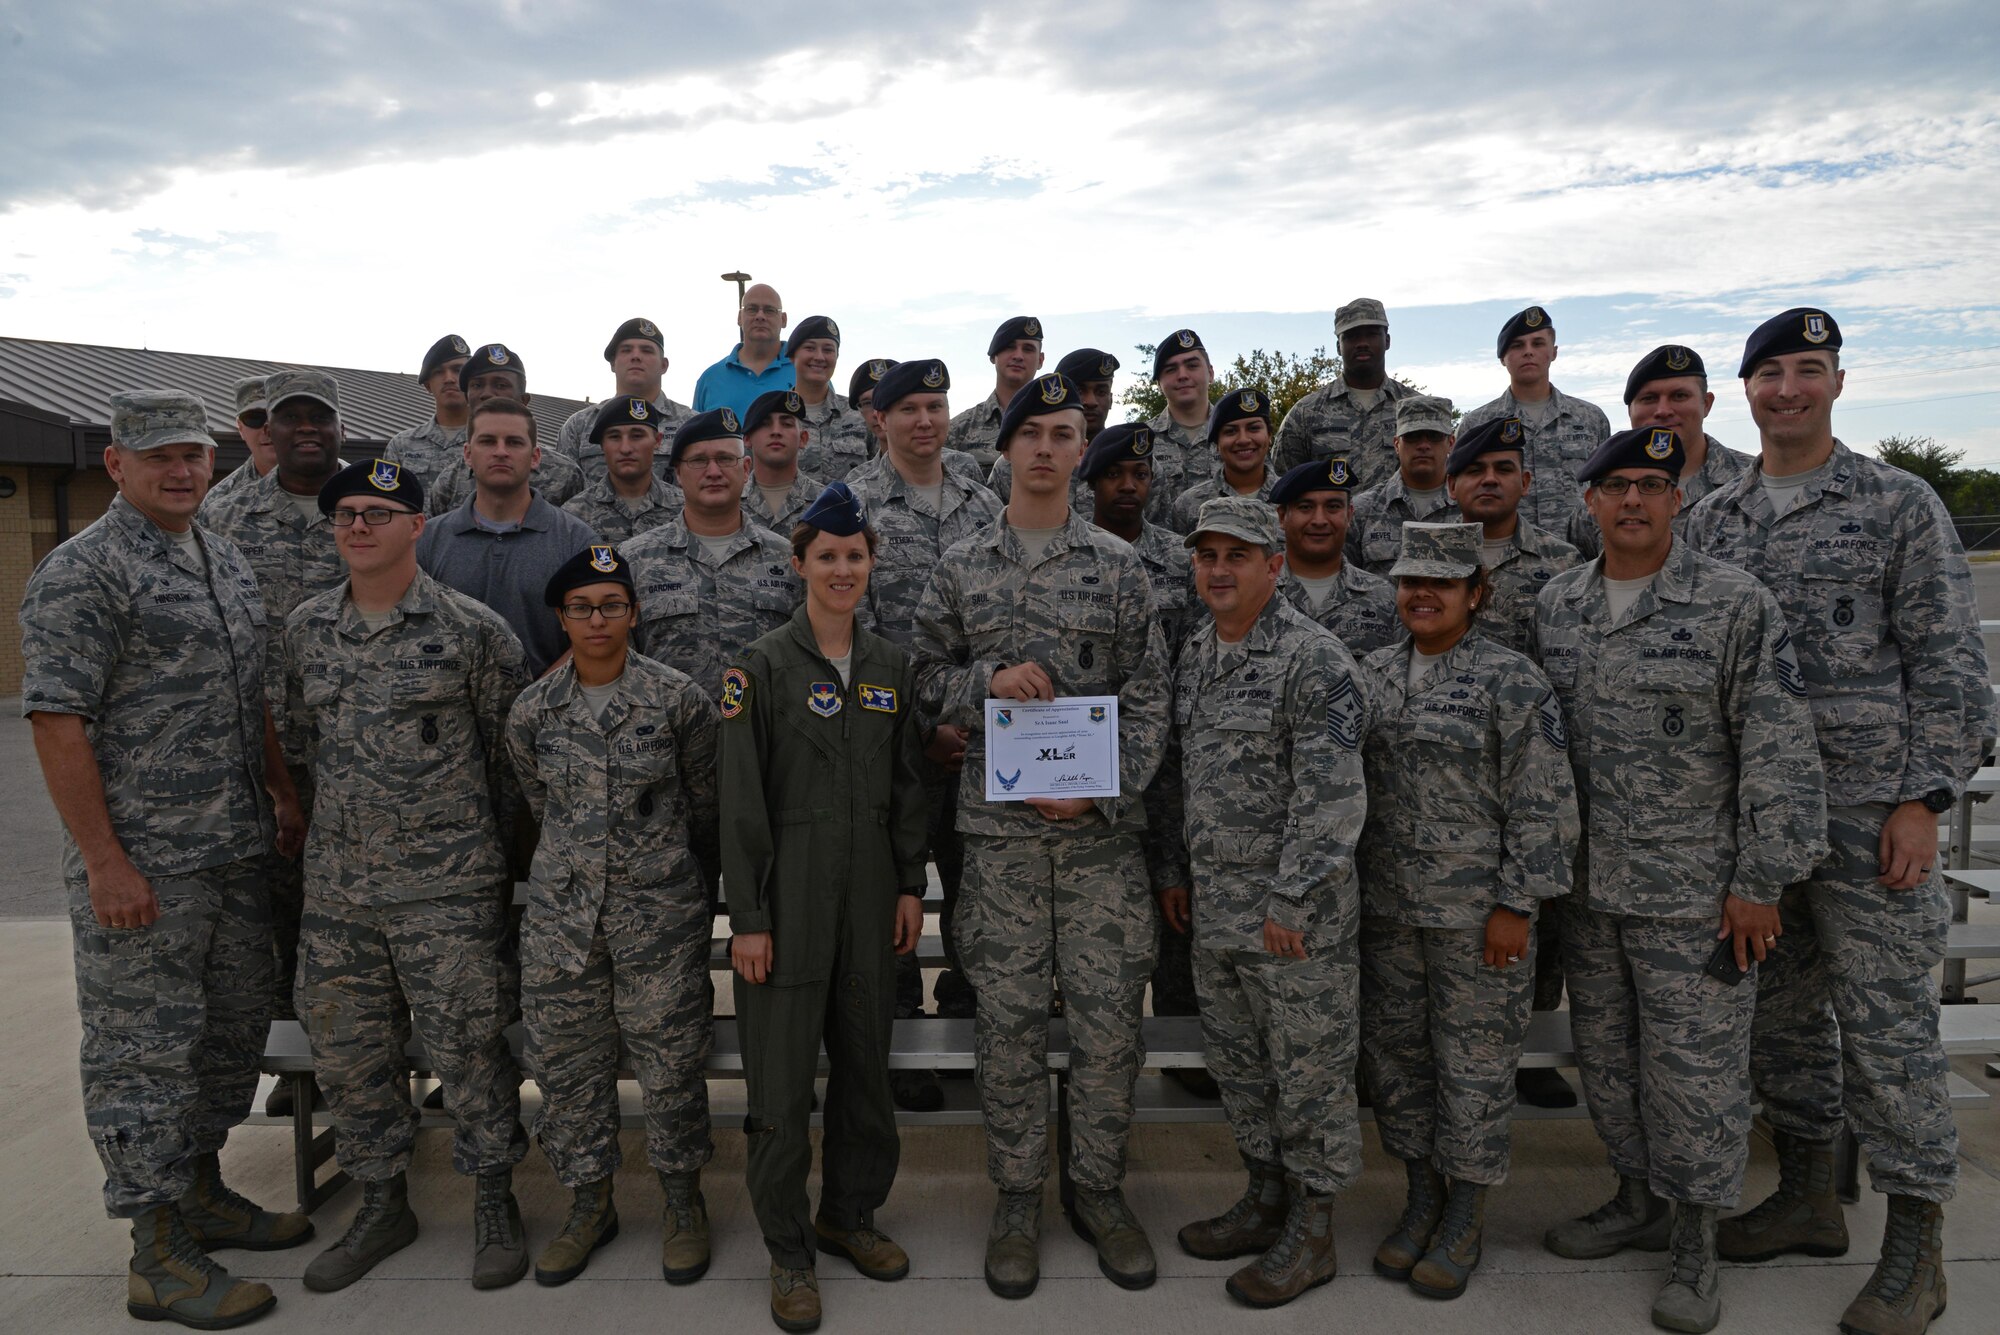 “XLer of the week” winner, U.S. Air Force SrA Isaac L. W. Saul accepts his award with members of the 47th Security Forces Squadron, along with Col. Michelle Pryor, 47th Flying Training Wing vice commander, and Chief Master Sgt. George Richey, 47th FTW command chief, at Laughlin Air Force Base, Tx., July 12, 2017. The “XLer” award, presented by wing leadership, is given to those who consistently make outstanding contributions to their unit, and Laughlin mission.